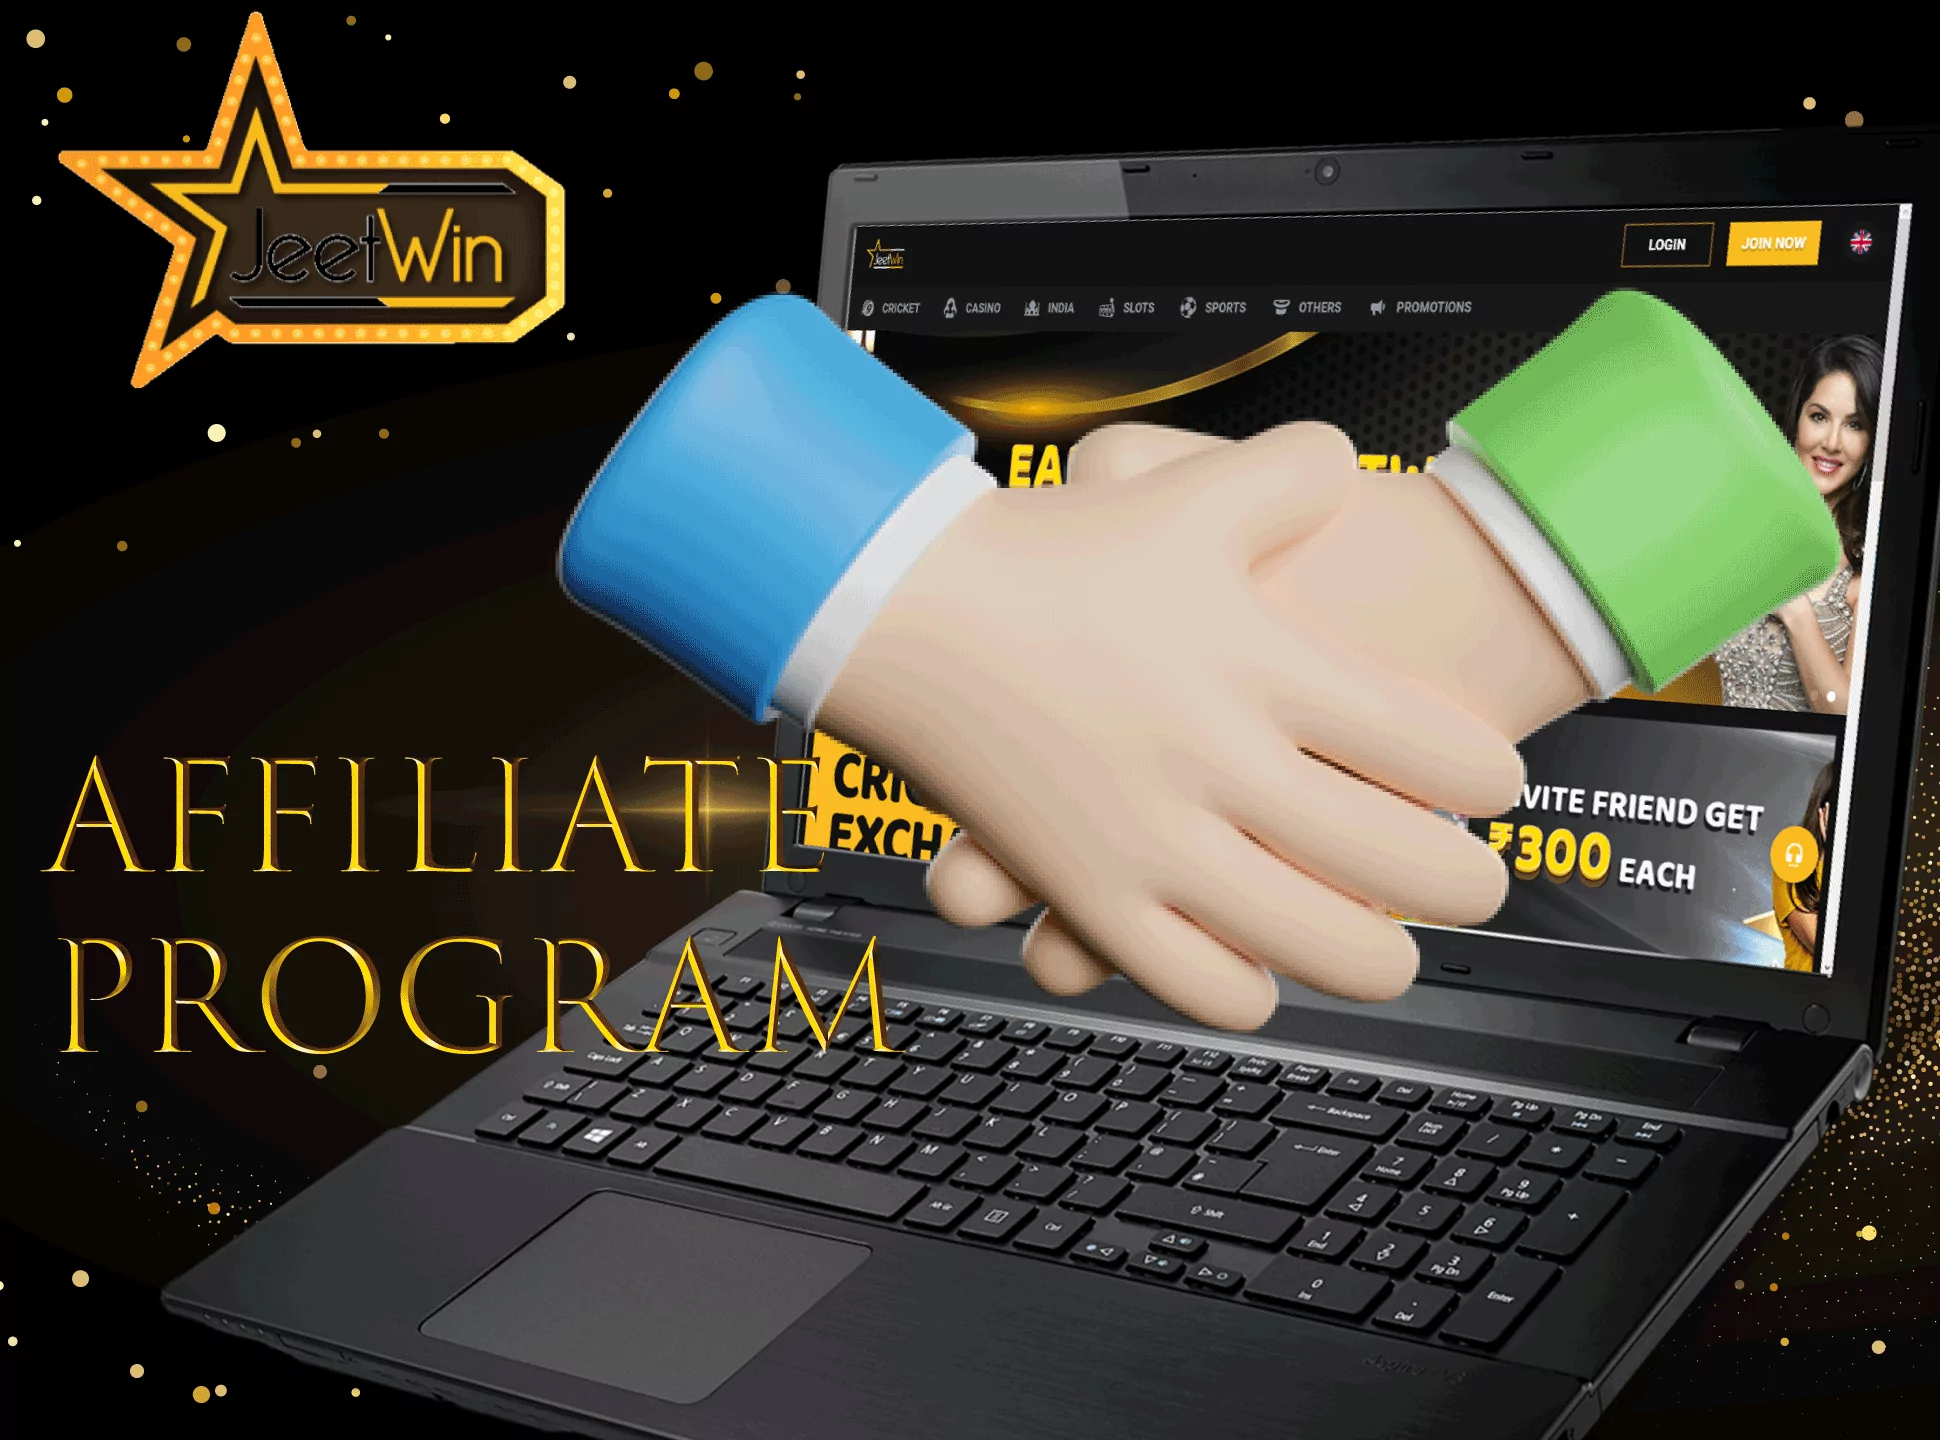 Join the Jeetwin affiliate program and get special bonuses.